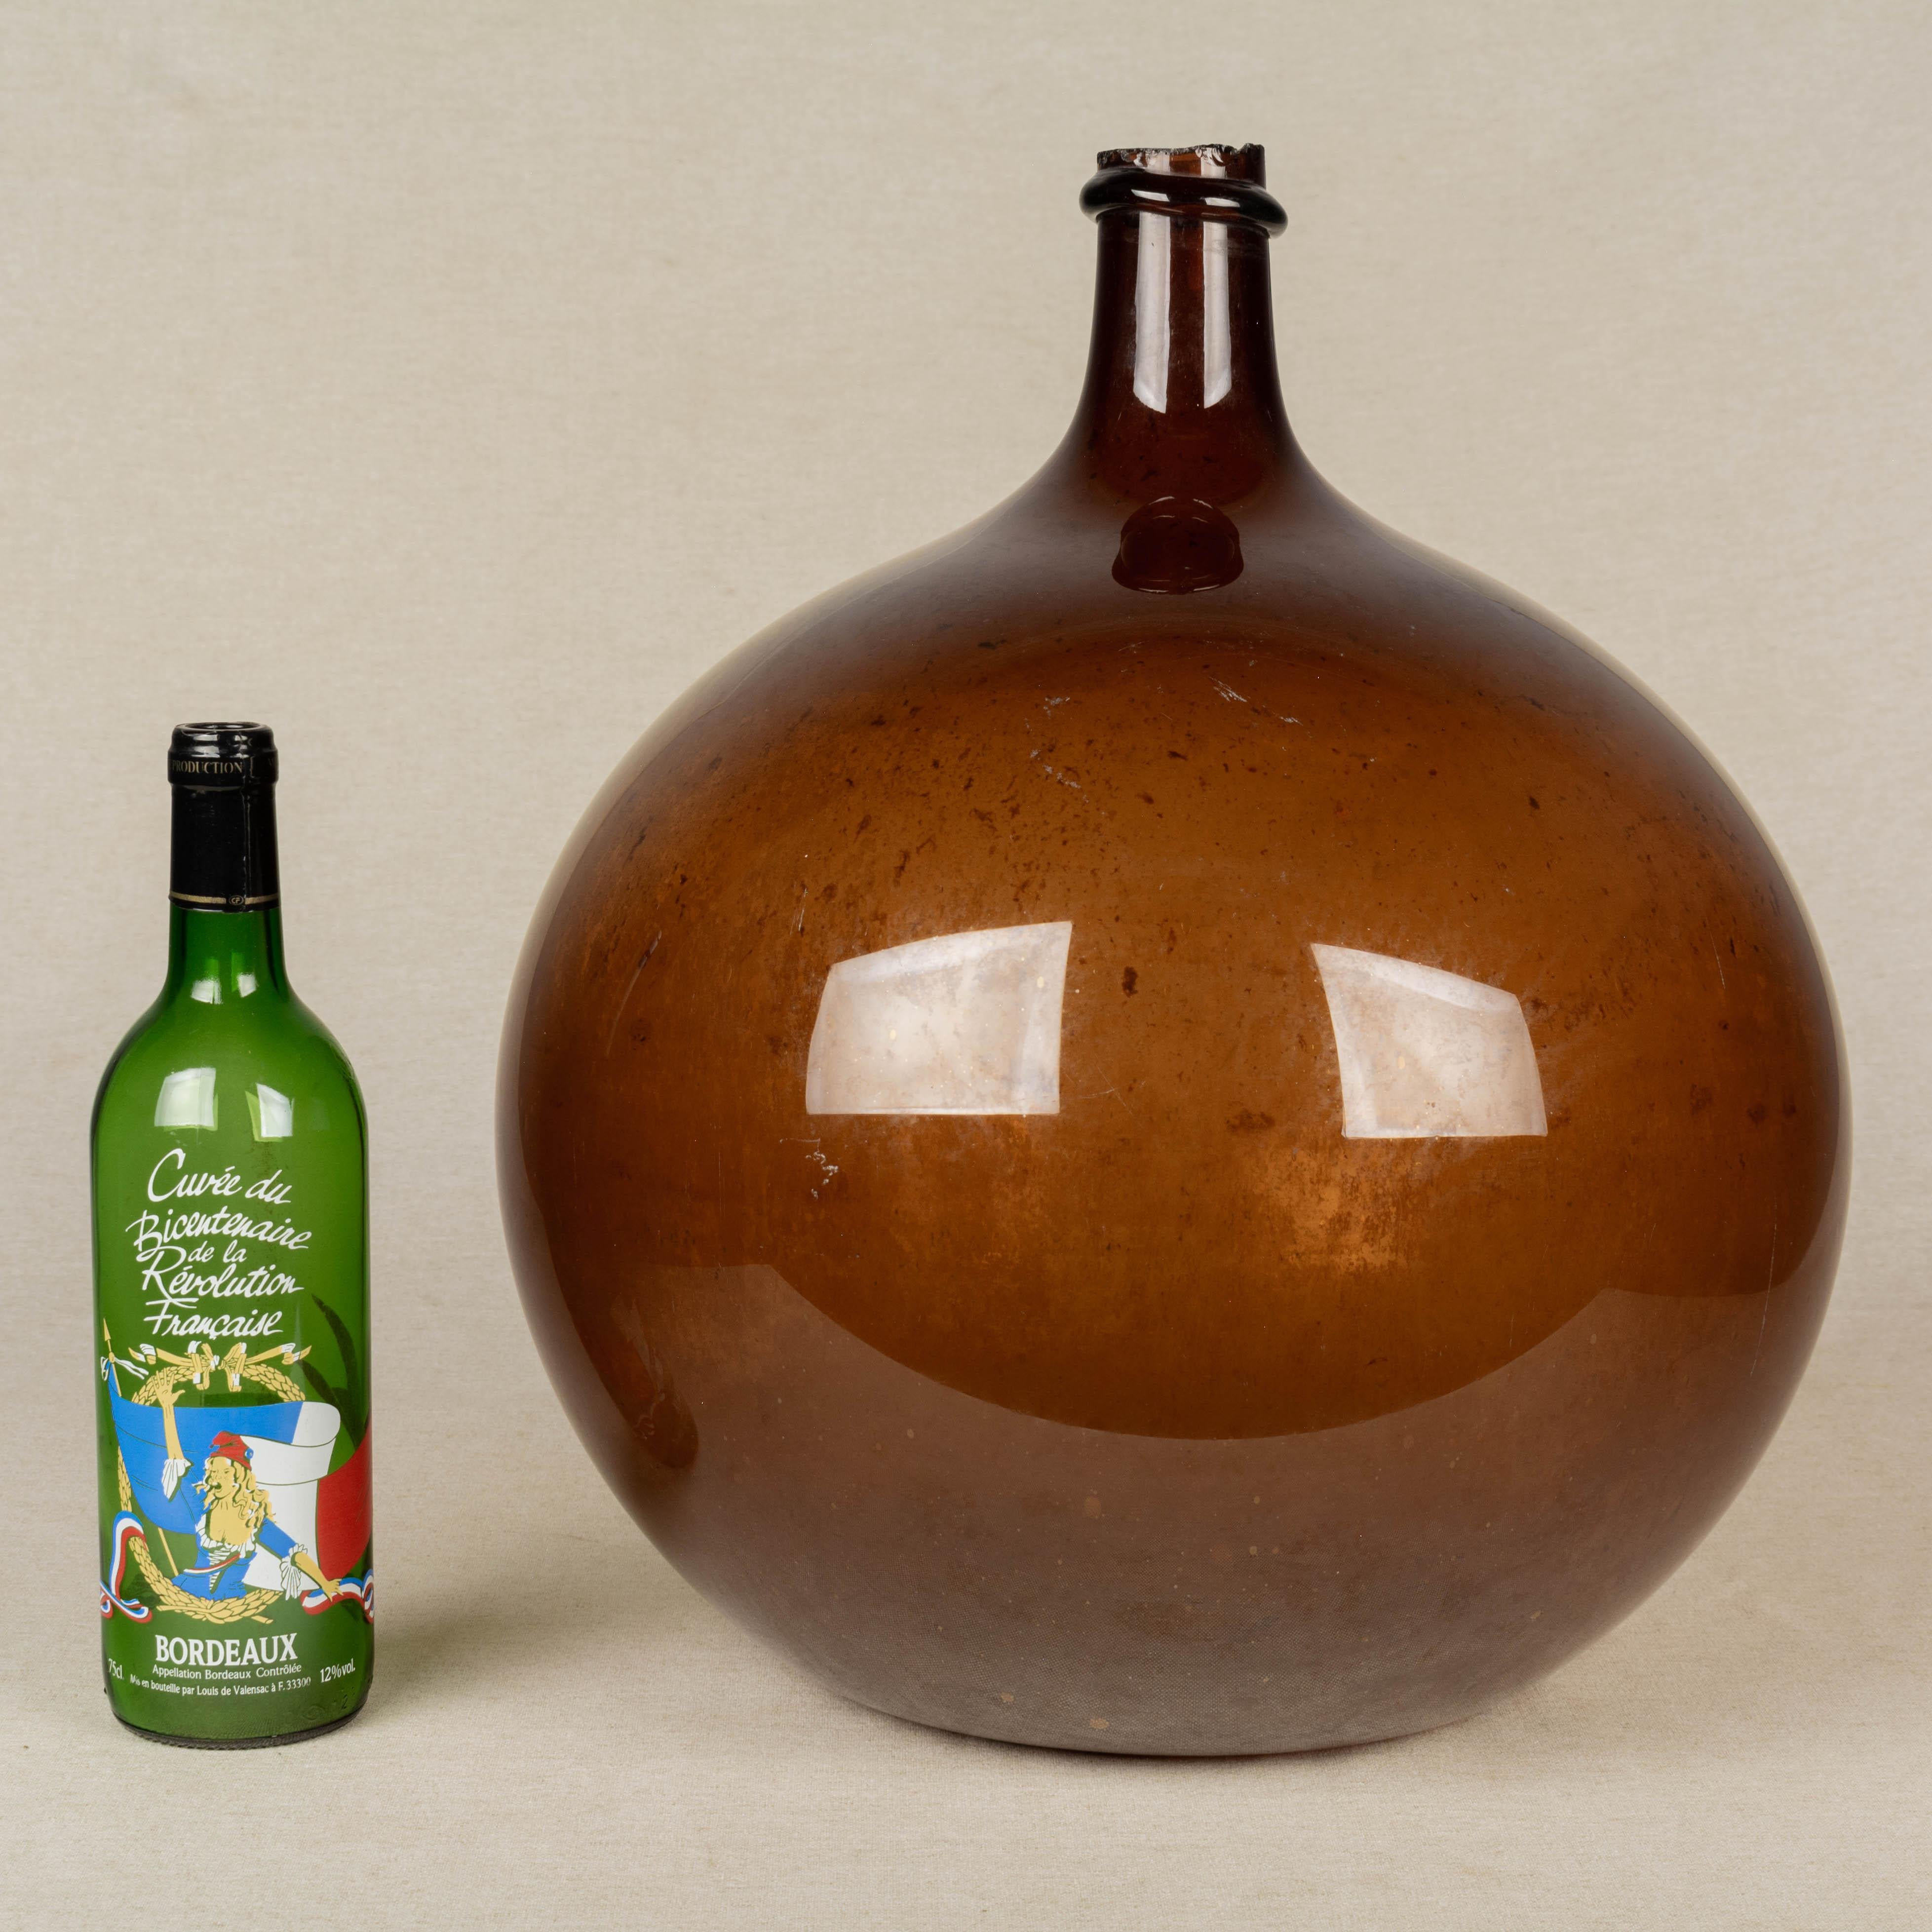 A 19th century French globular form amber demijohn bottle with air bubbles typical of handblown glass. Please refer to photos for more details. 
Measures: 18